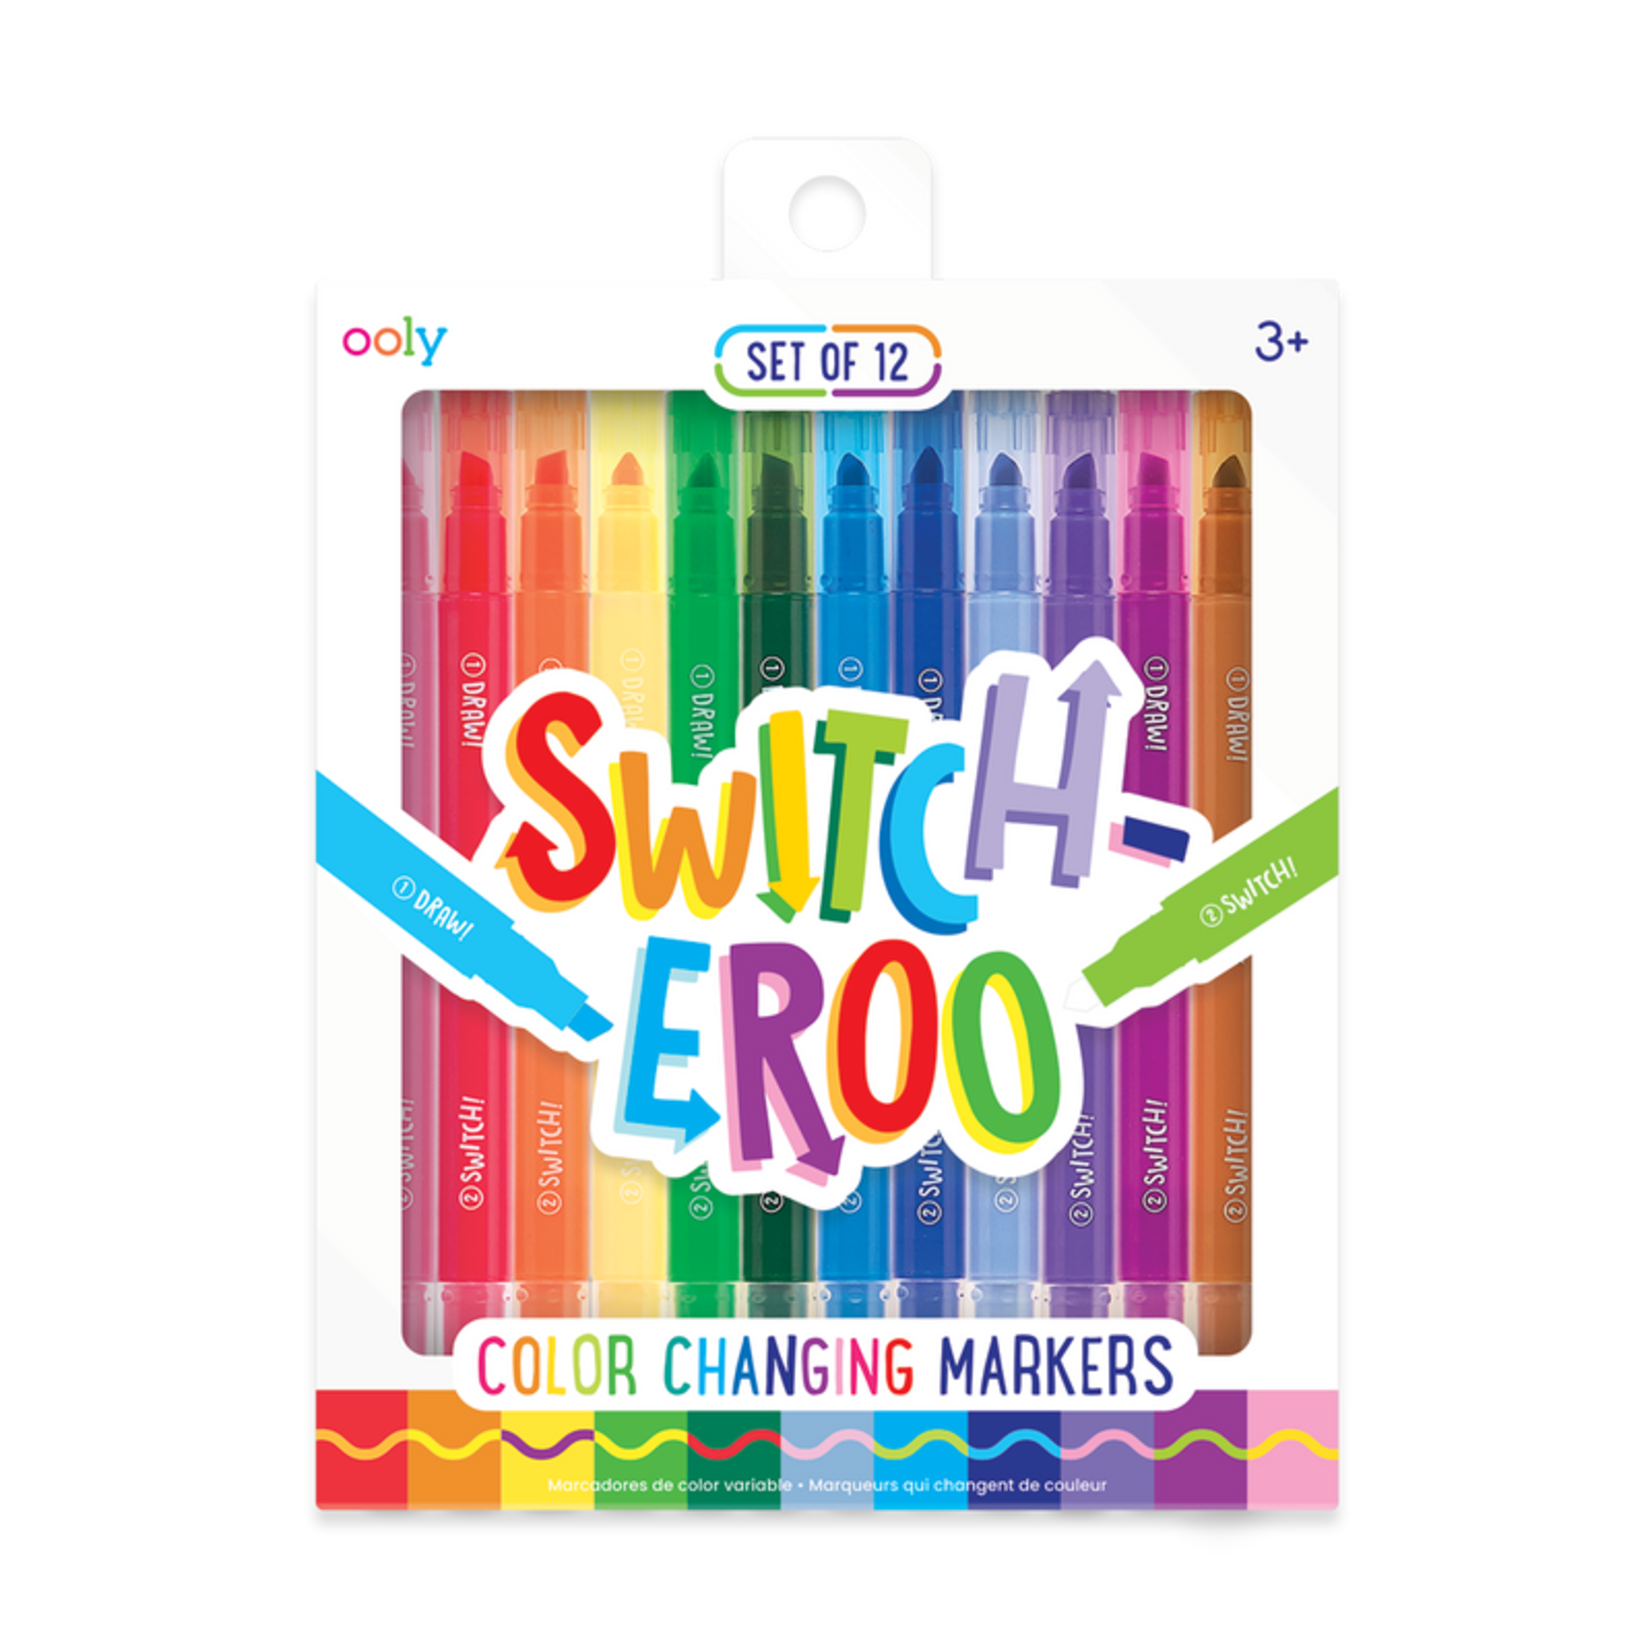 ooly Switch-eroo! Color-Changing Markers (Set of 12)